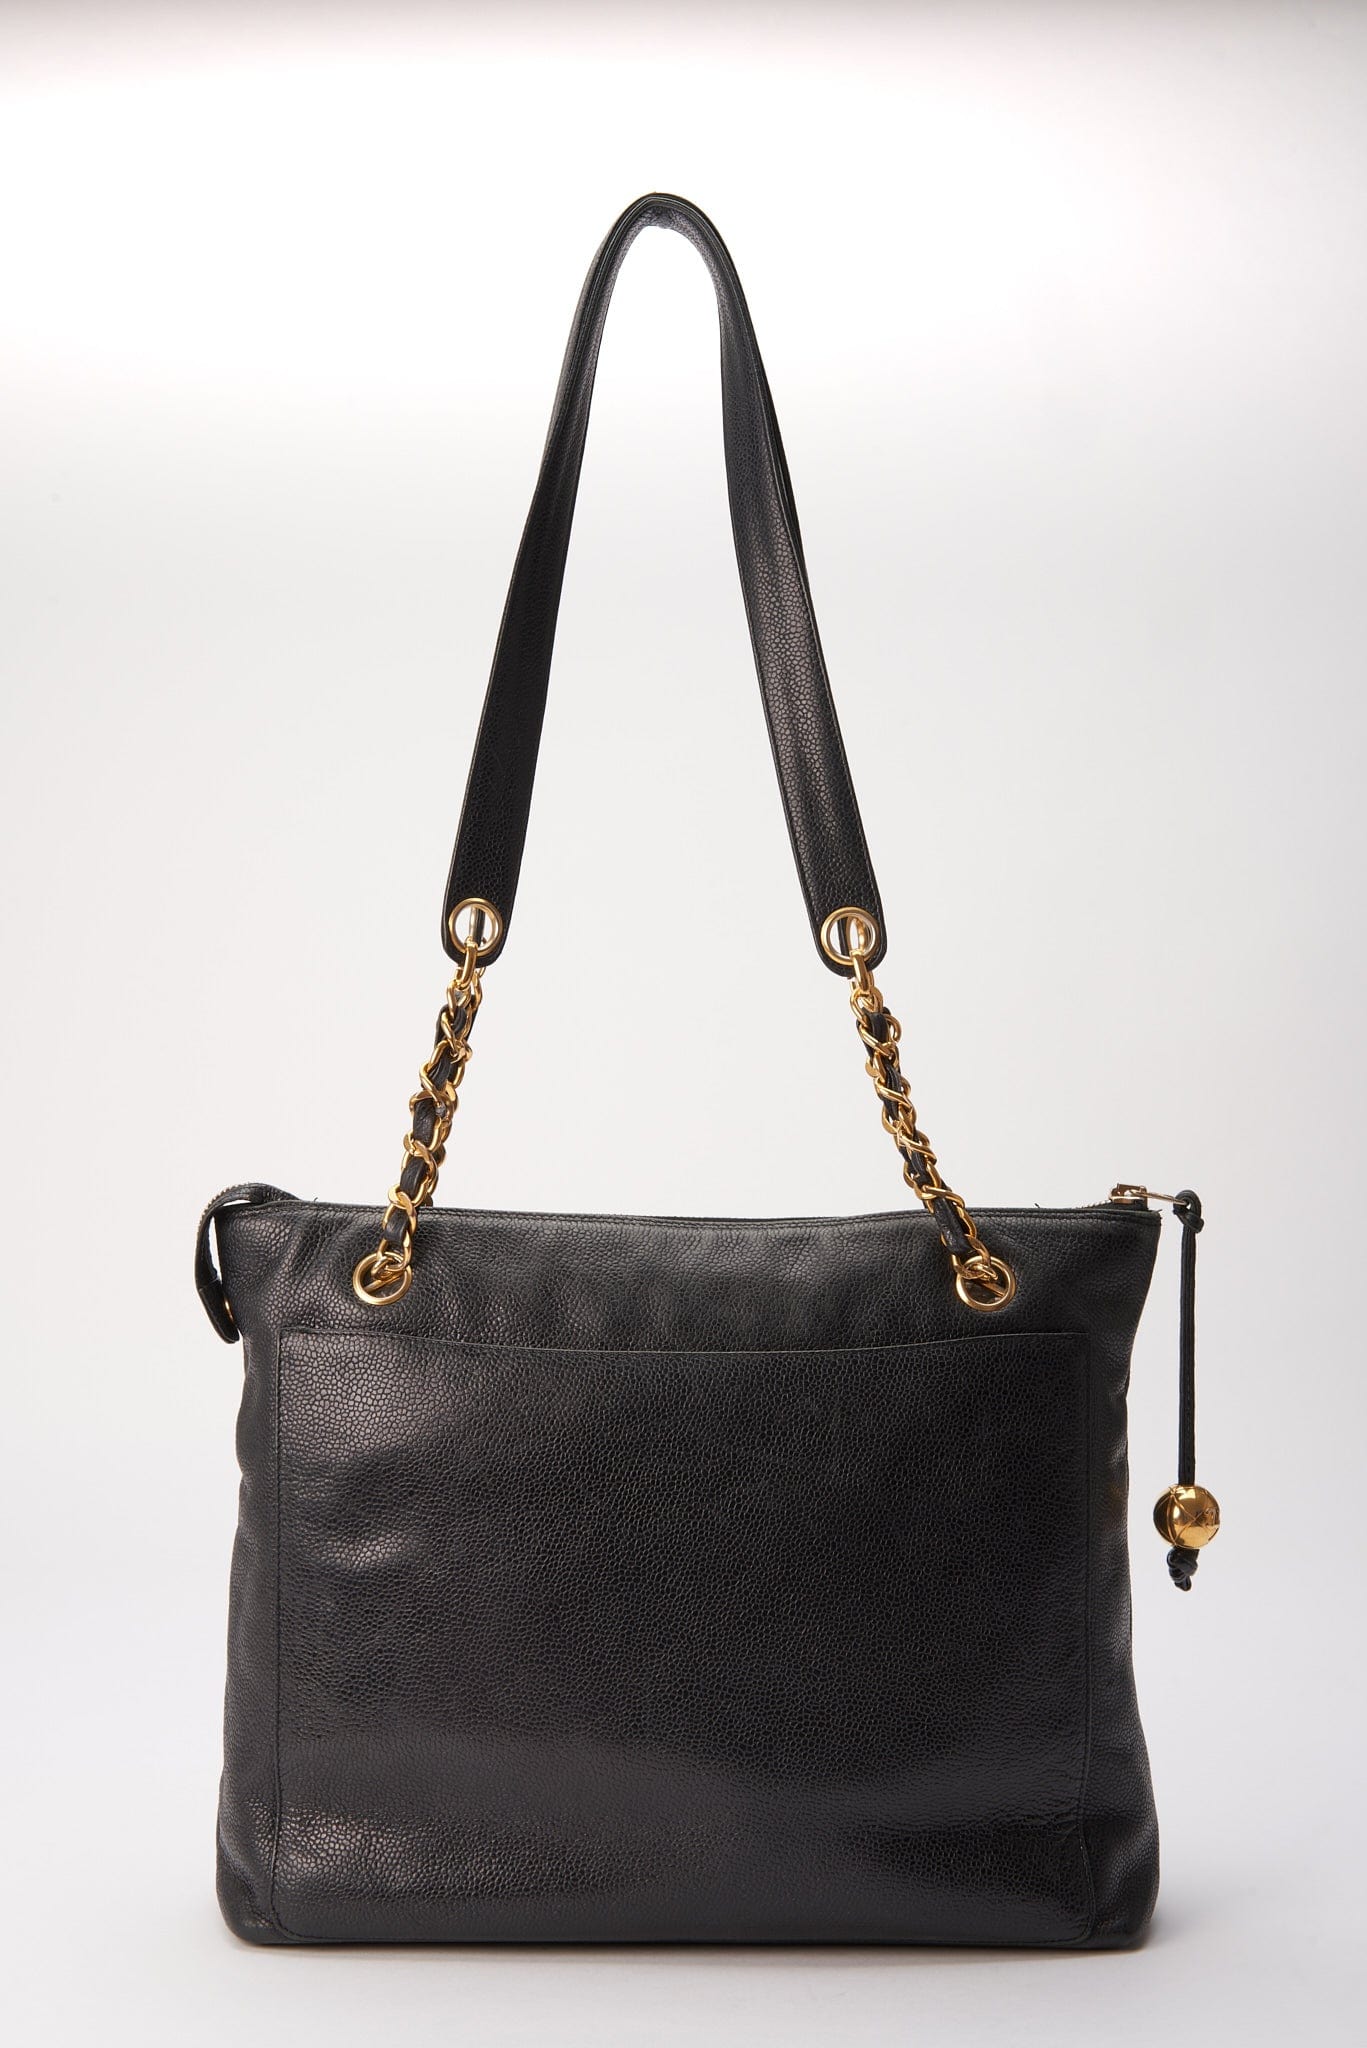 Vintage Chanel Black Leather Tote Bag with 24K Gold Plated Hardware